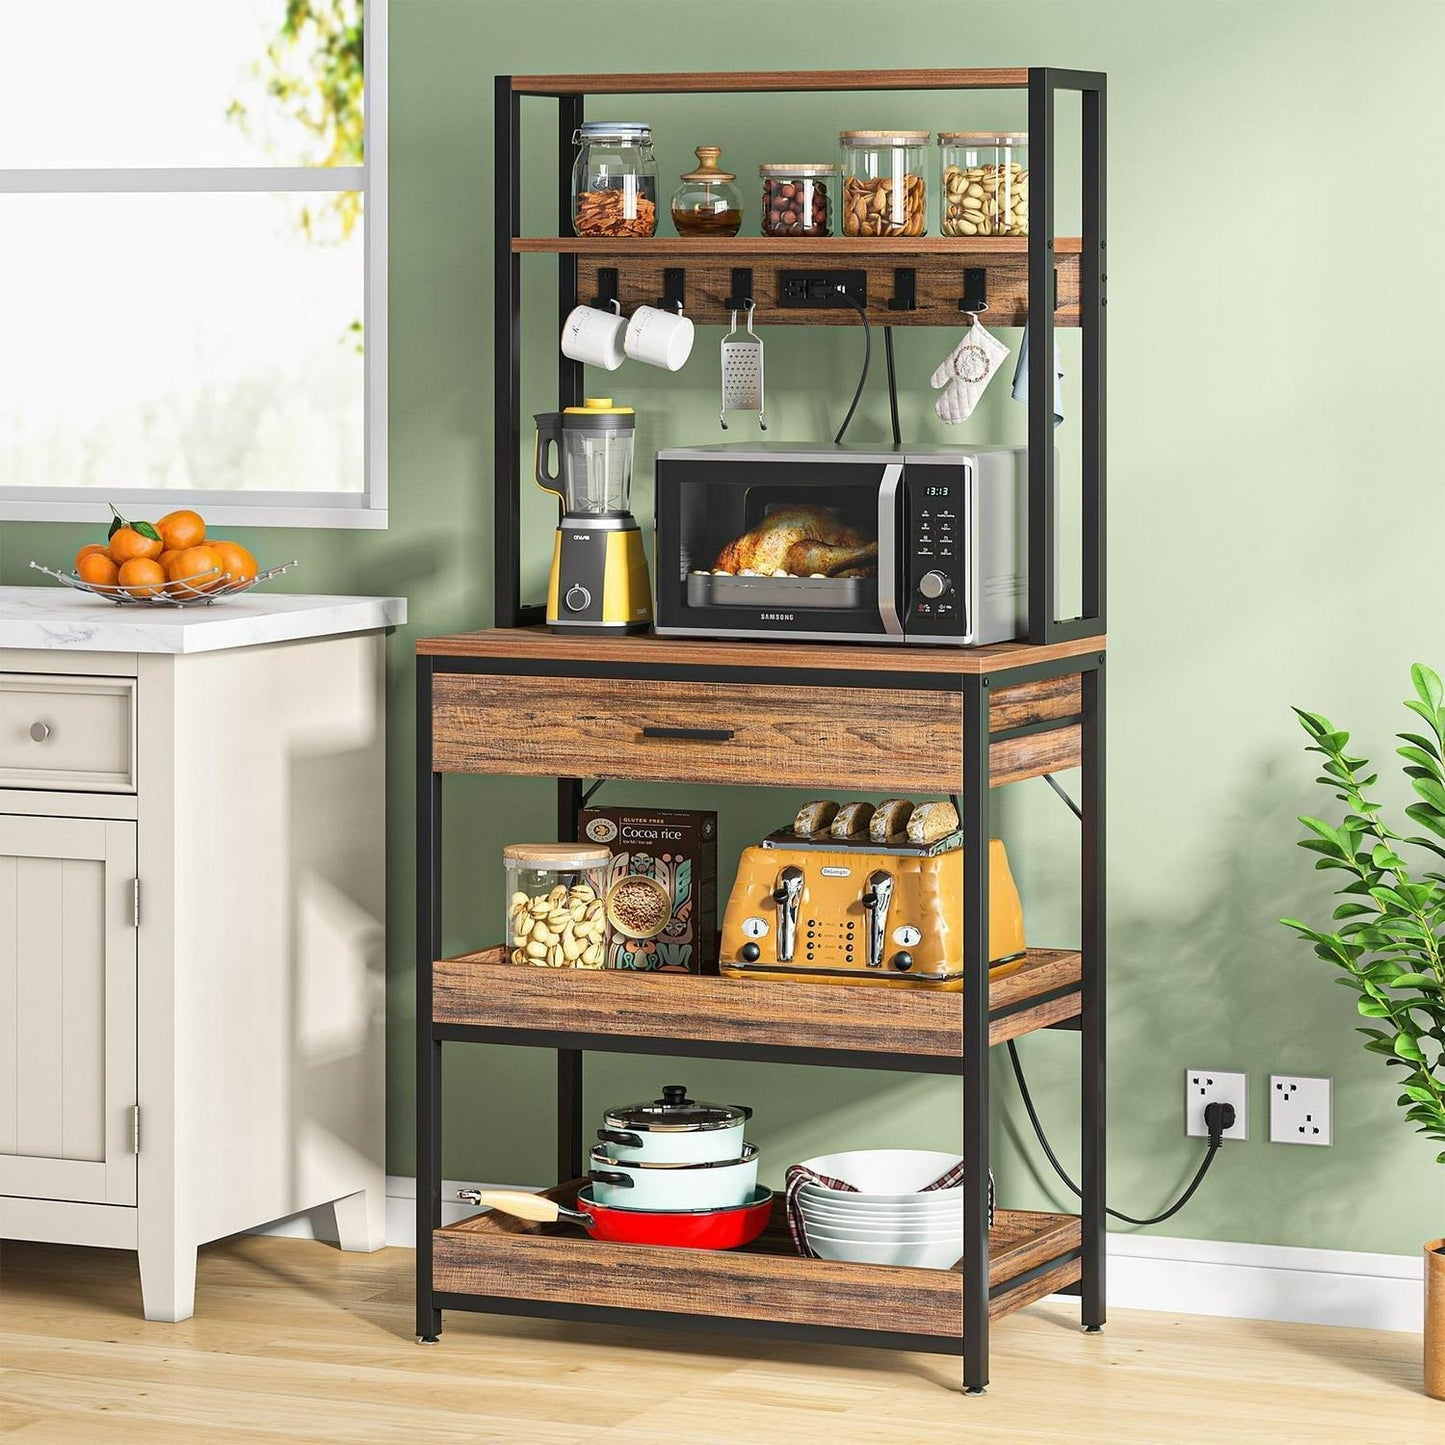 5.5ft 2-Tier Kitchen Baker's Rack w/ Outlets, Rustic Brown Fin - Microwave Stand